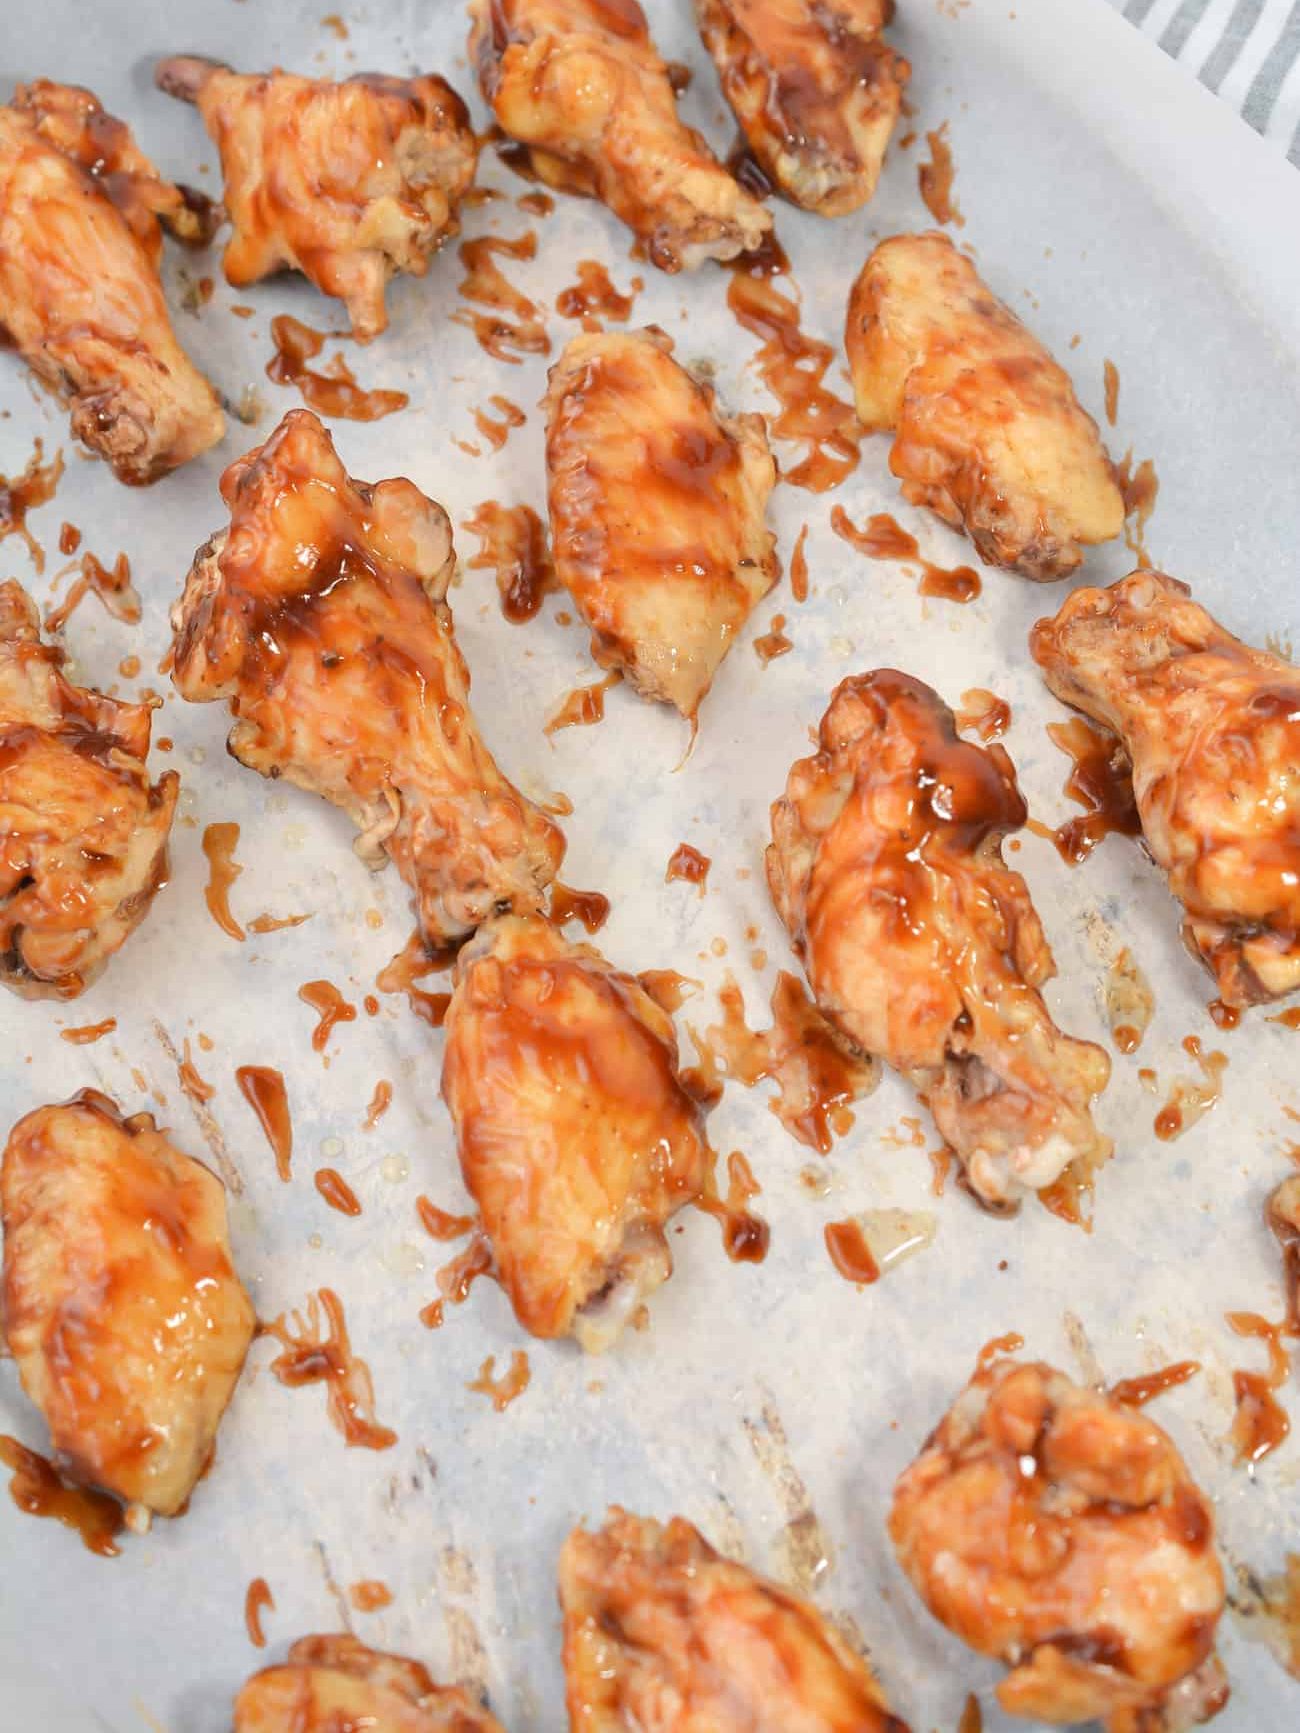 Brush the chicken wings with BBQ sauce on both sides.